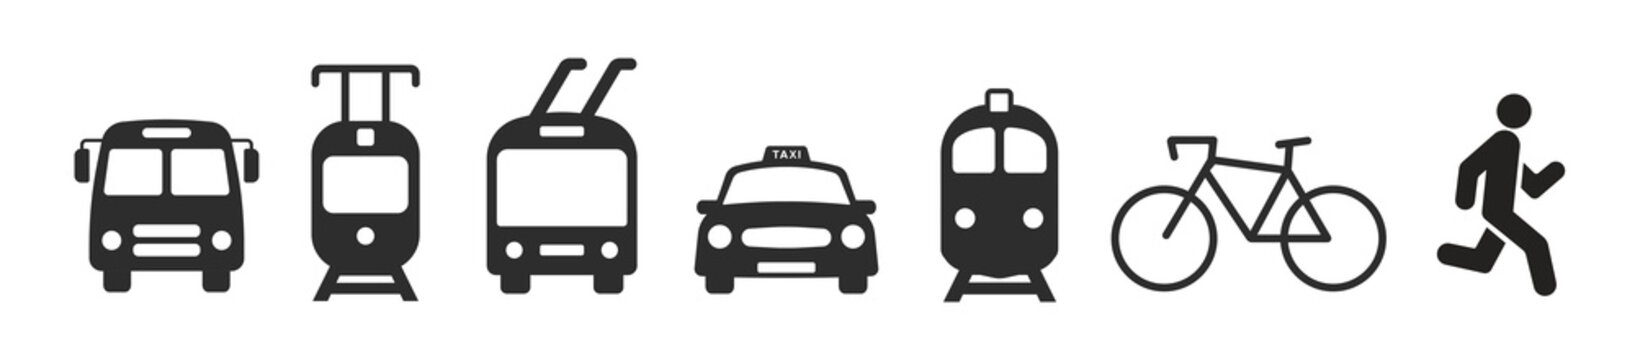 Transportation Icons Or Public Transport Icons Set. Vector